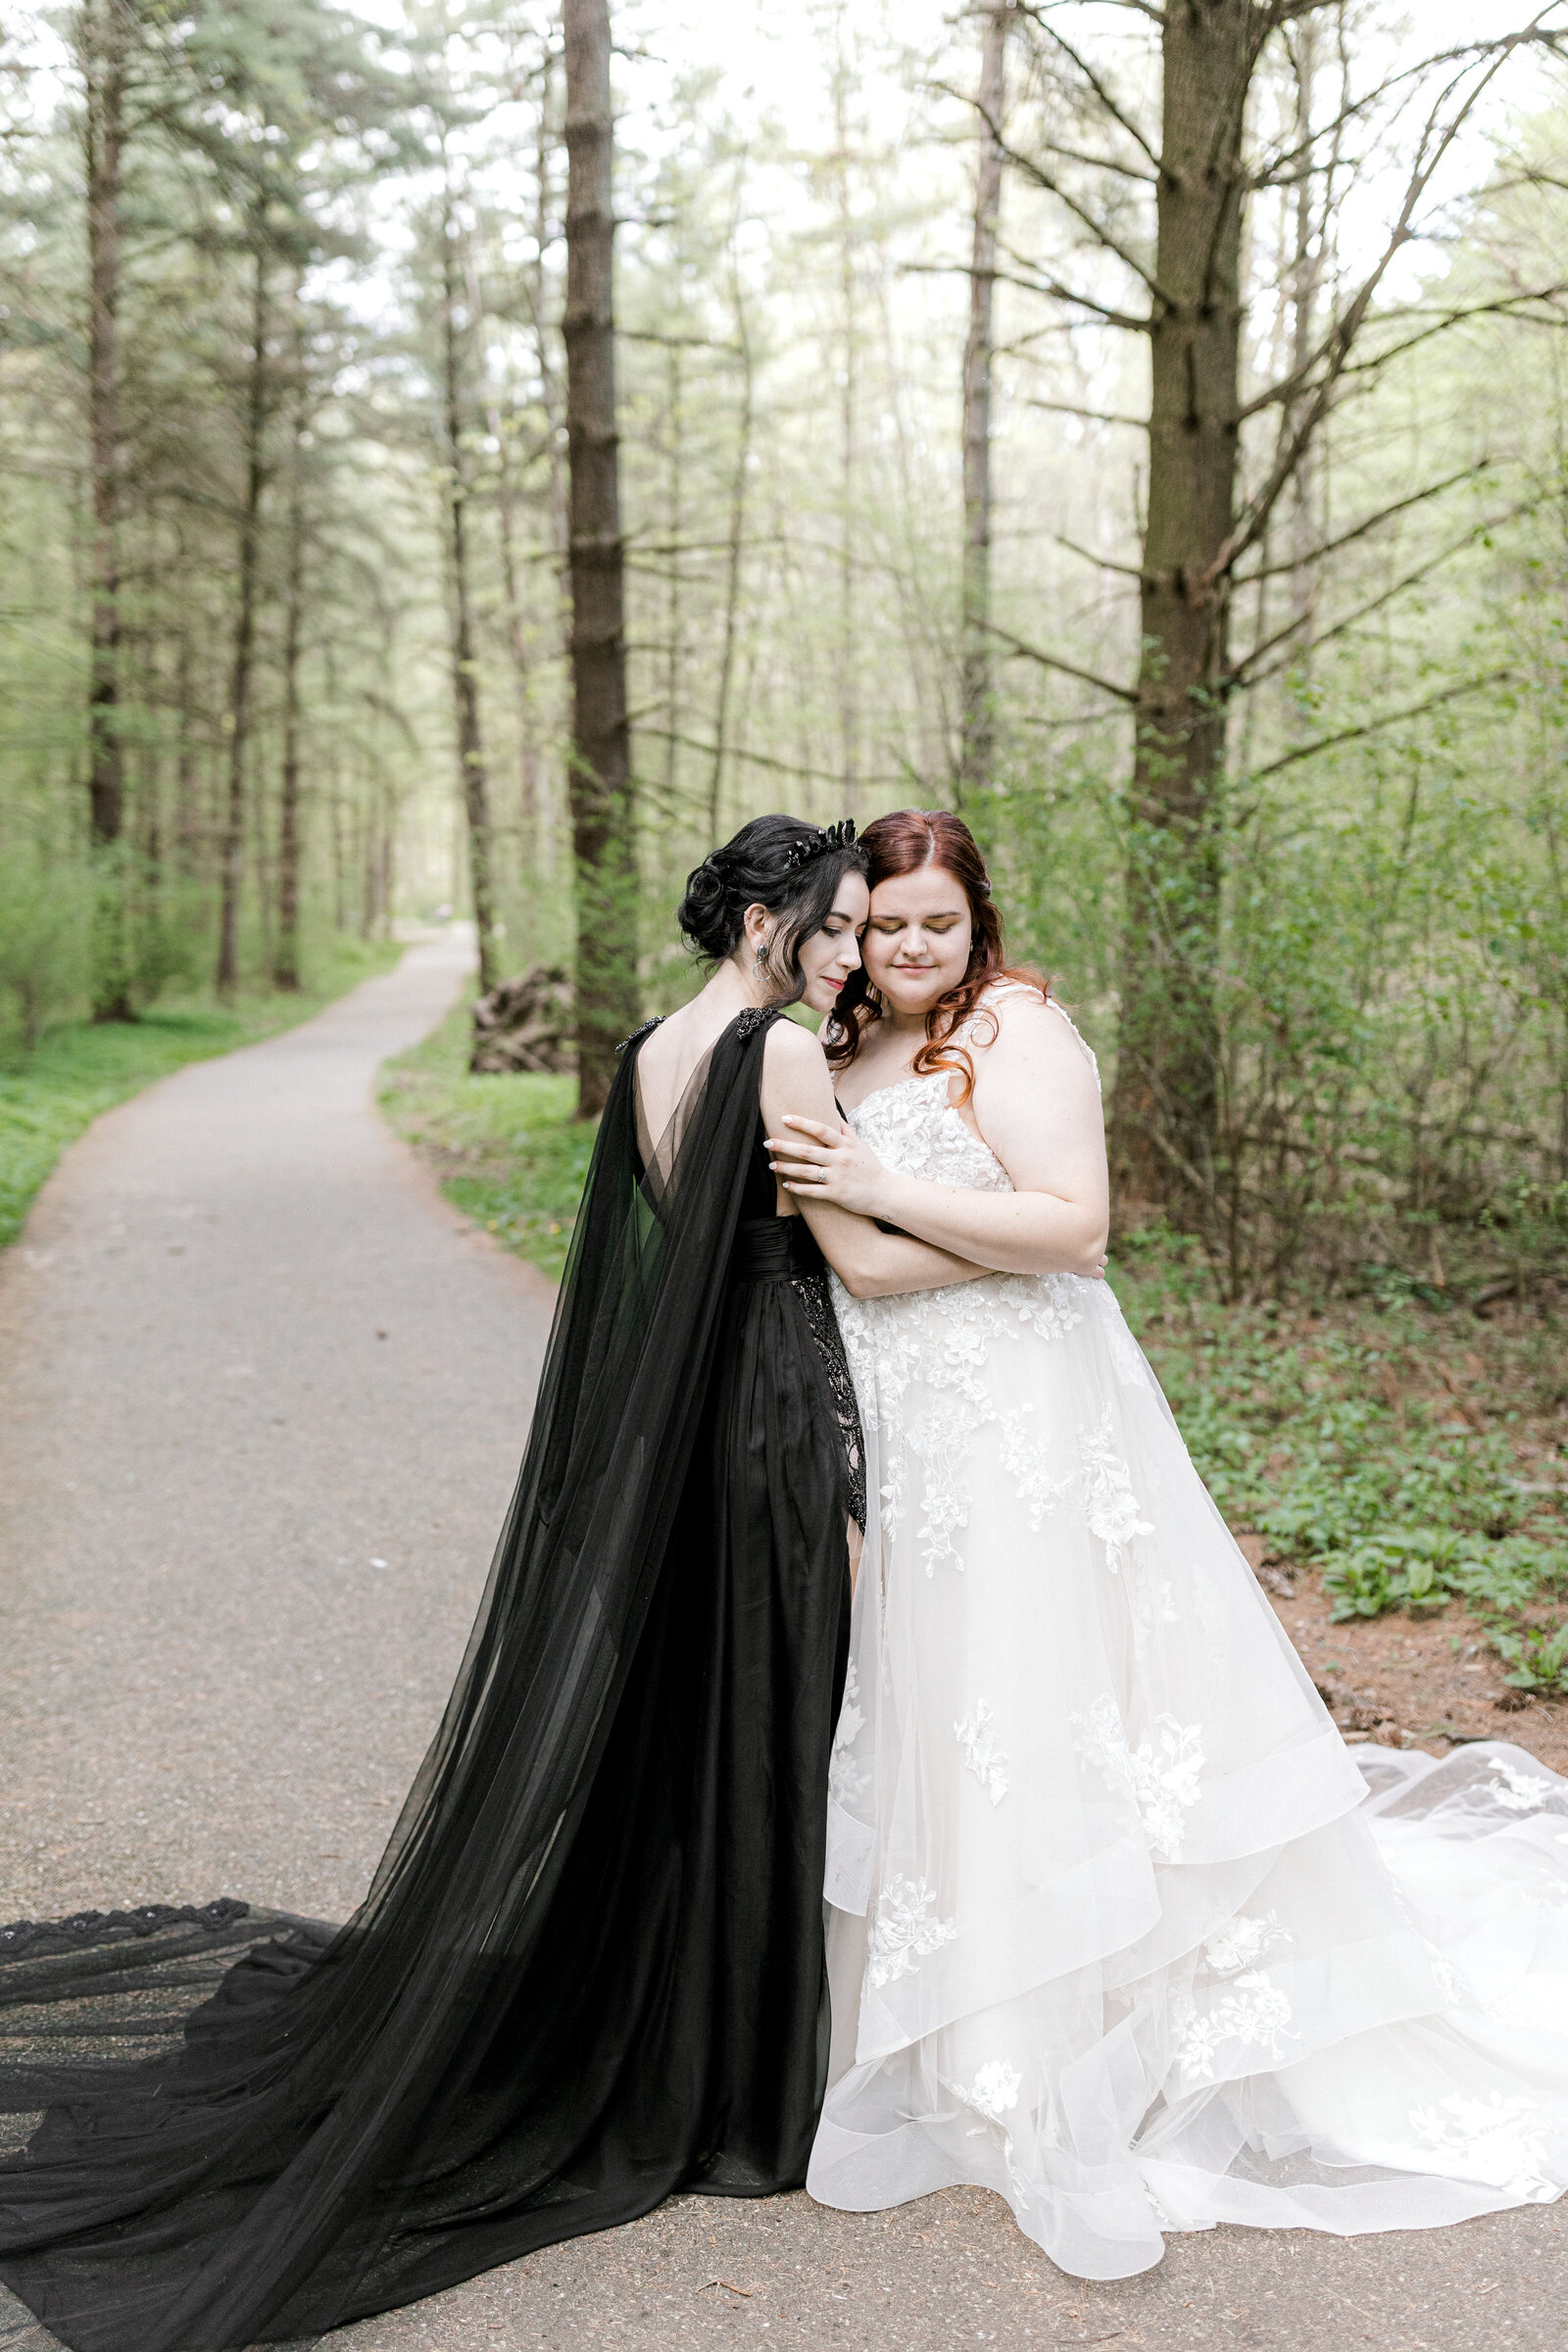 Two brides embracing in the forest